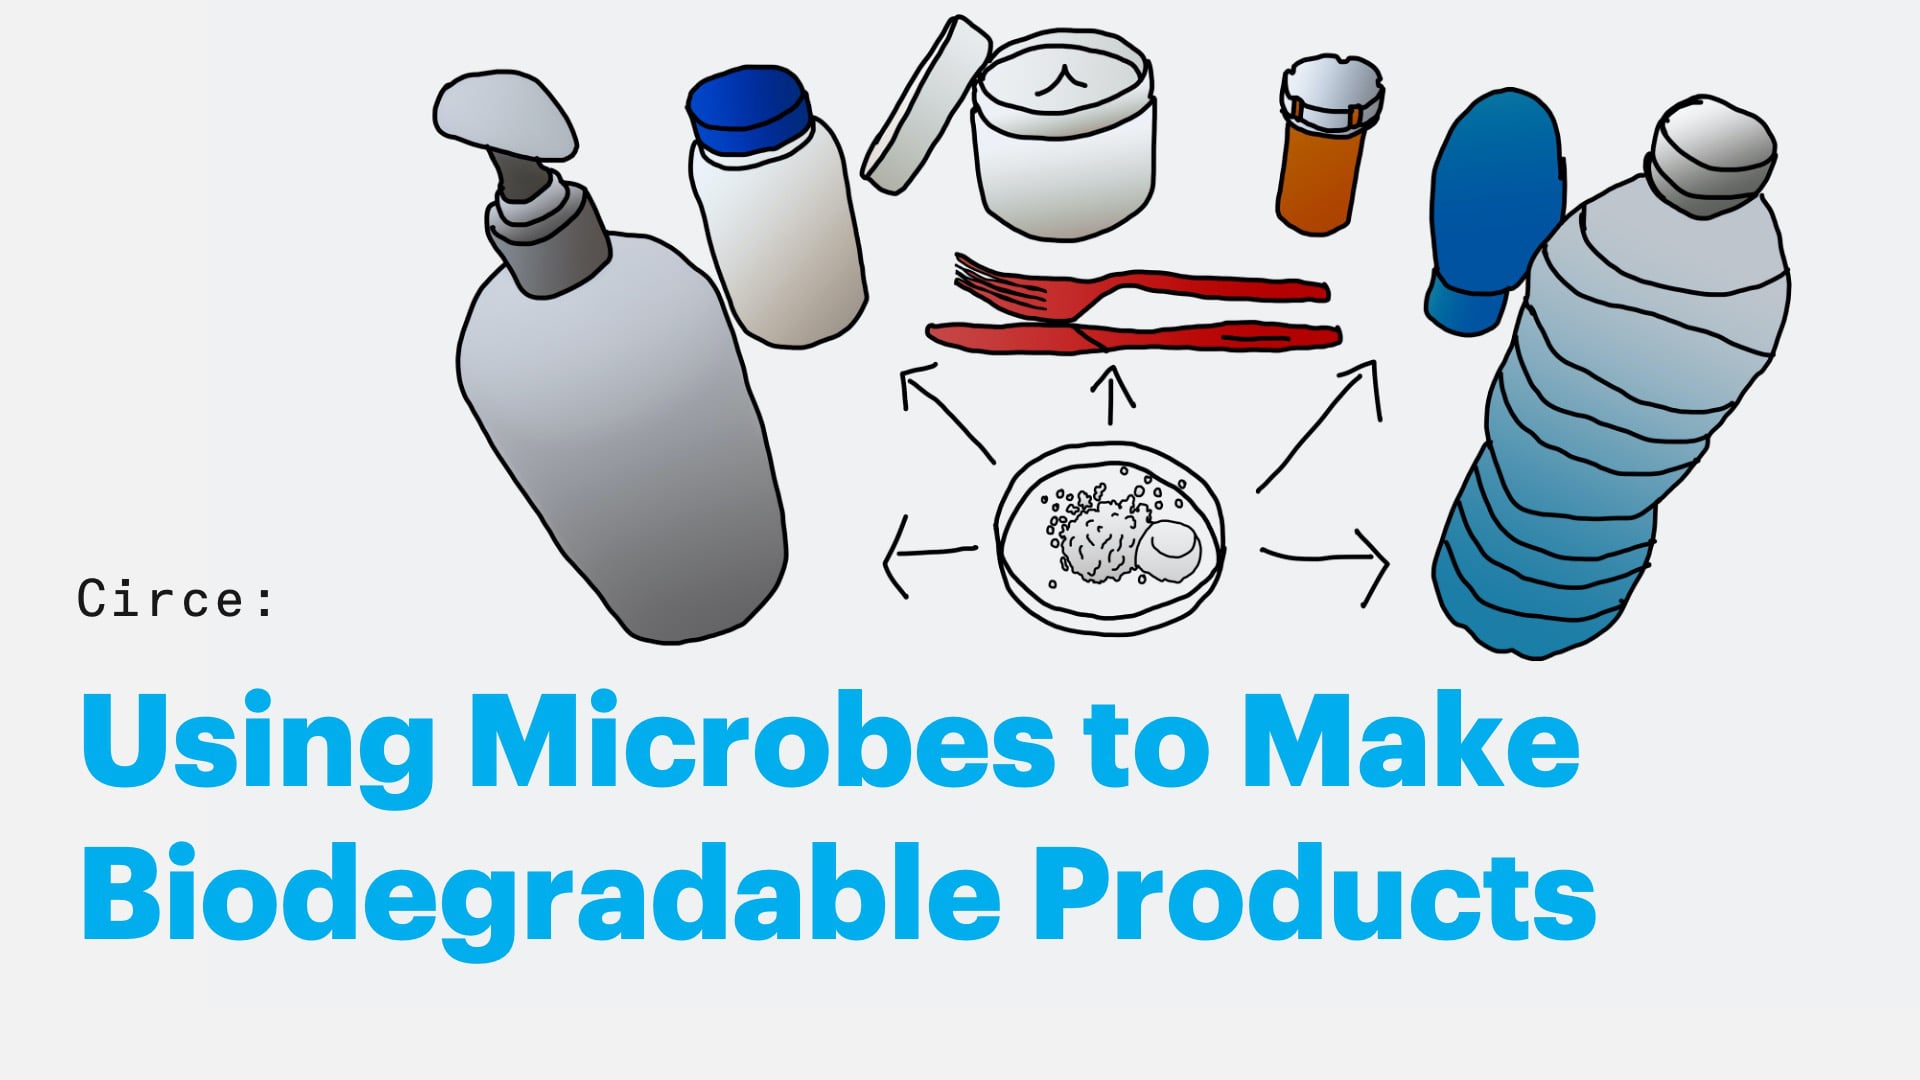 Circe: Using Microbes to Make Biodegradable Products